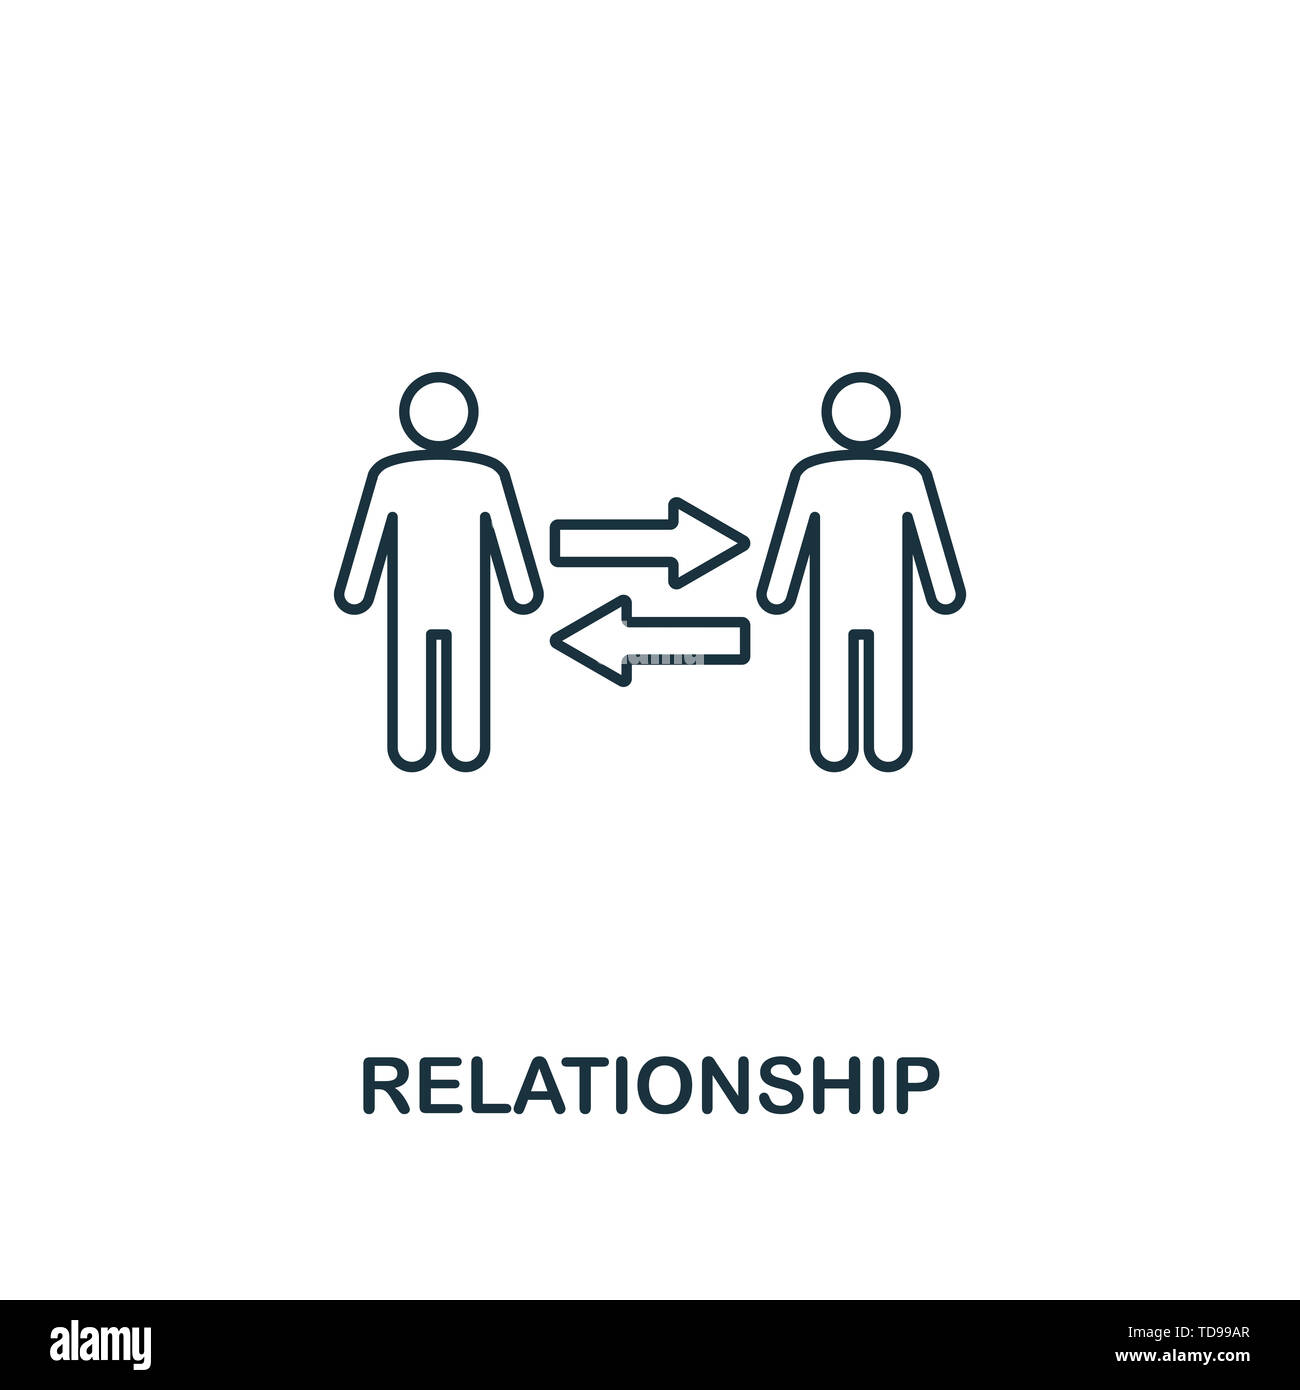 Relationship icon. Thin line design symbol from business ethics icons collection. Pixel perfect relationship icon for web design, apps, software Stock Photo